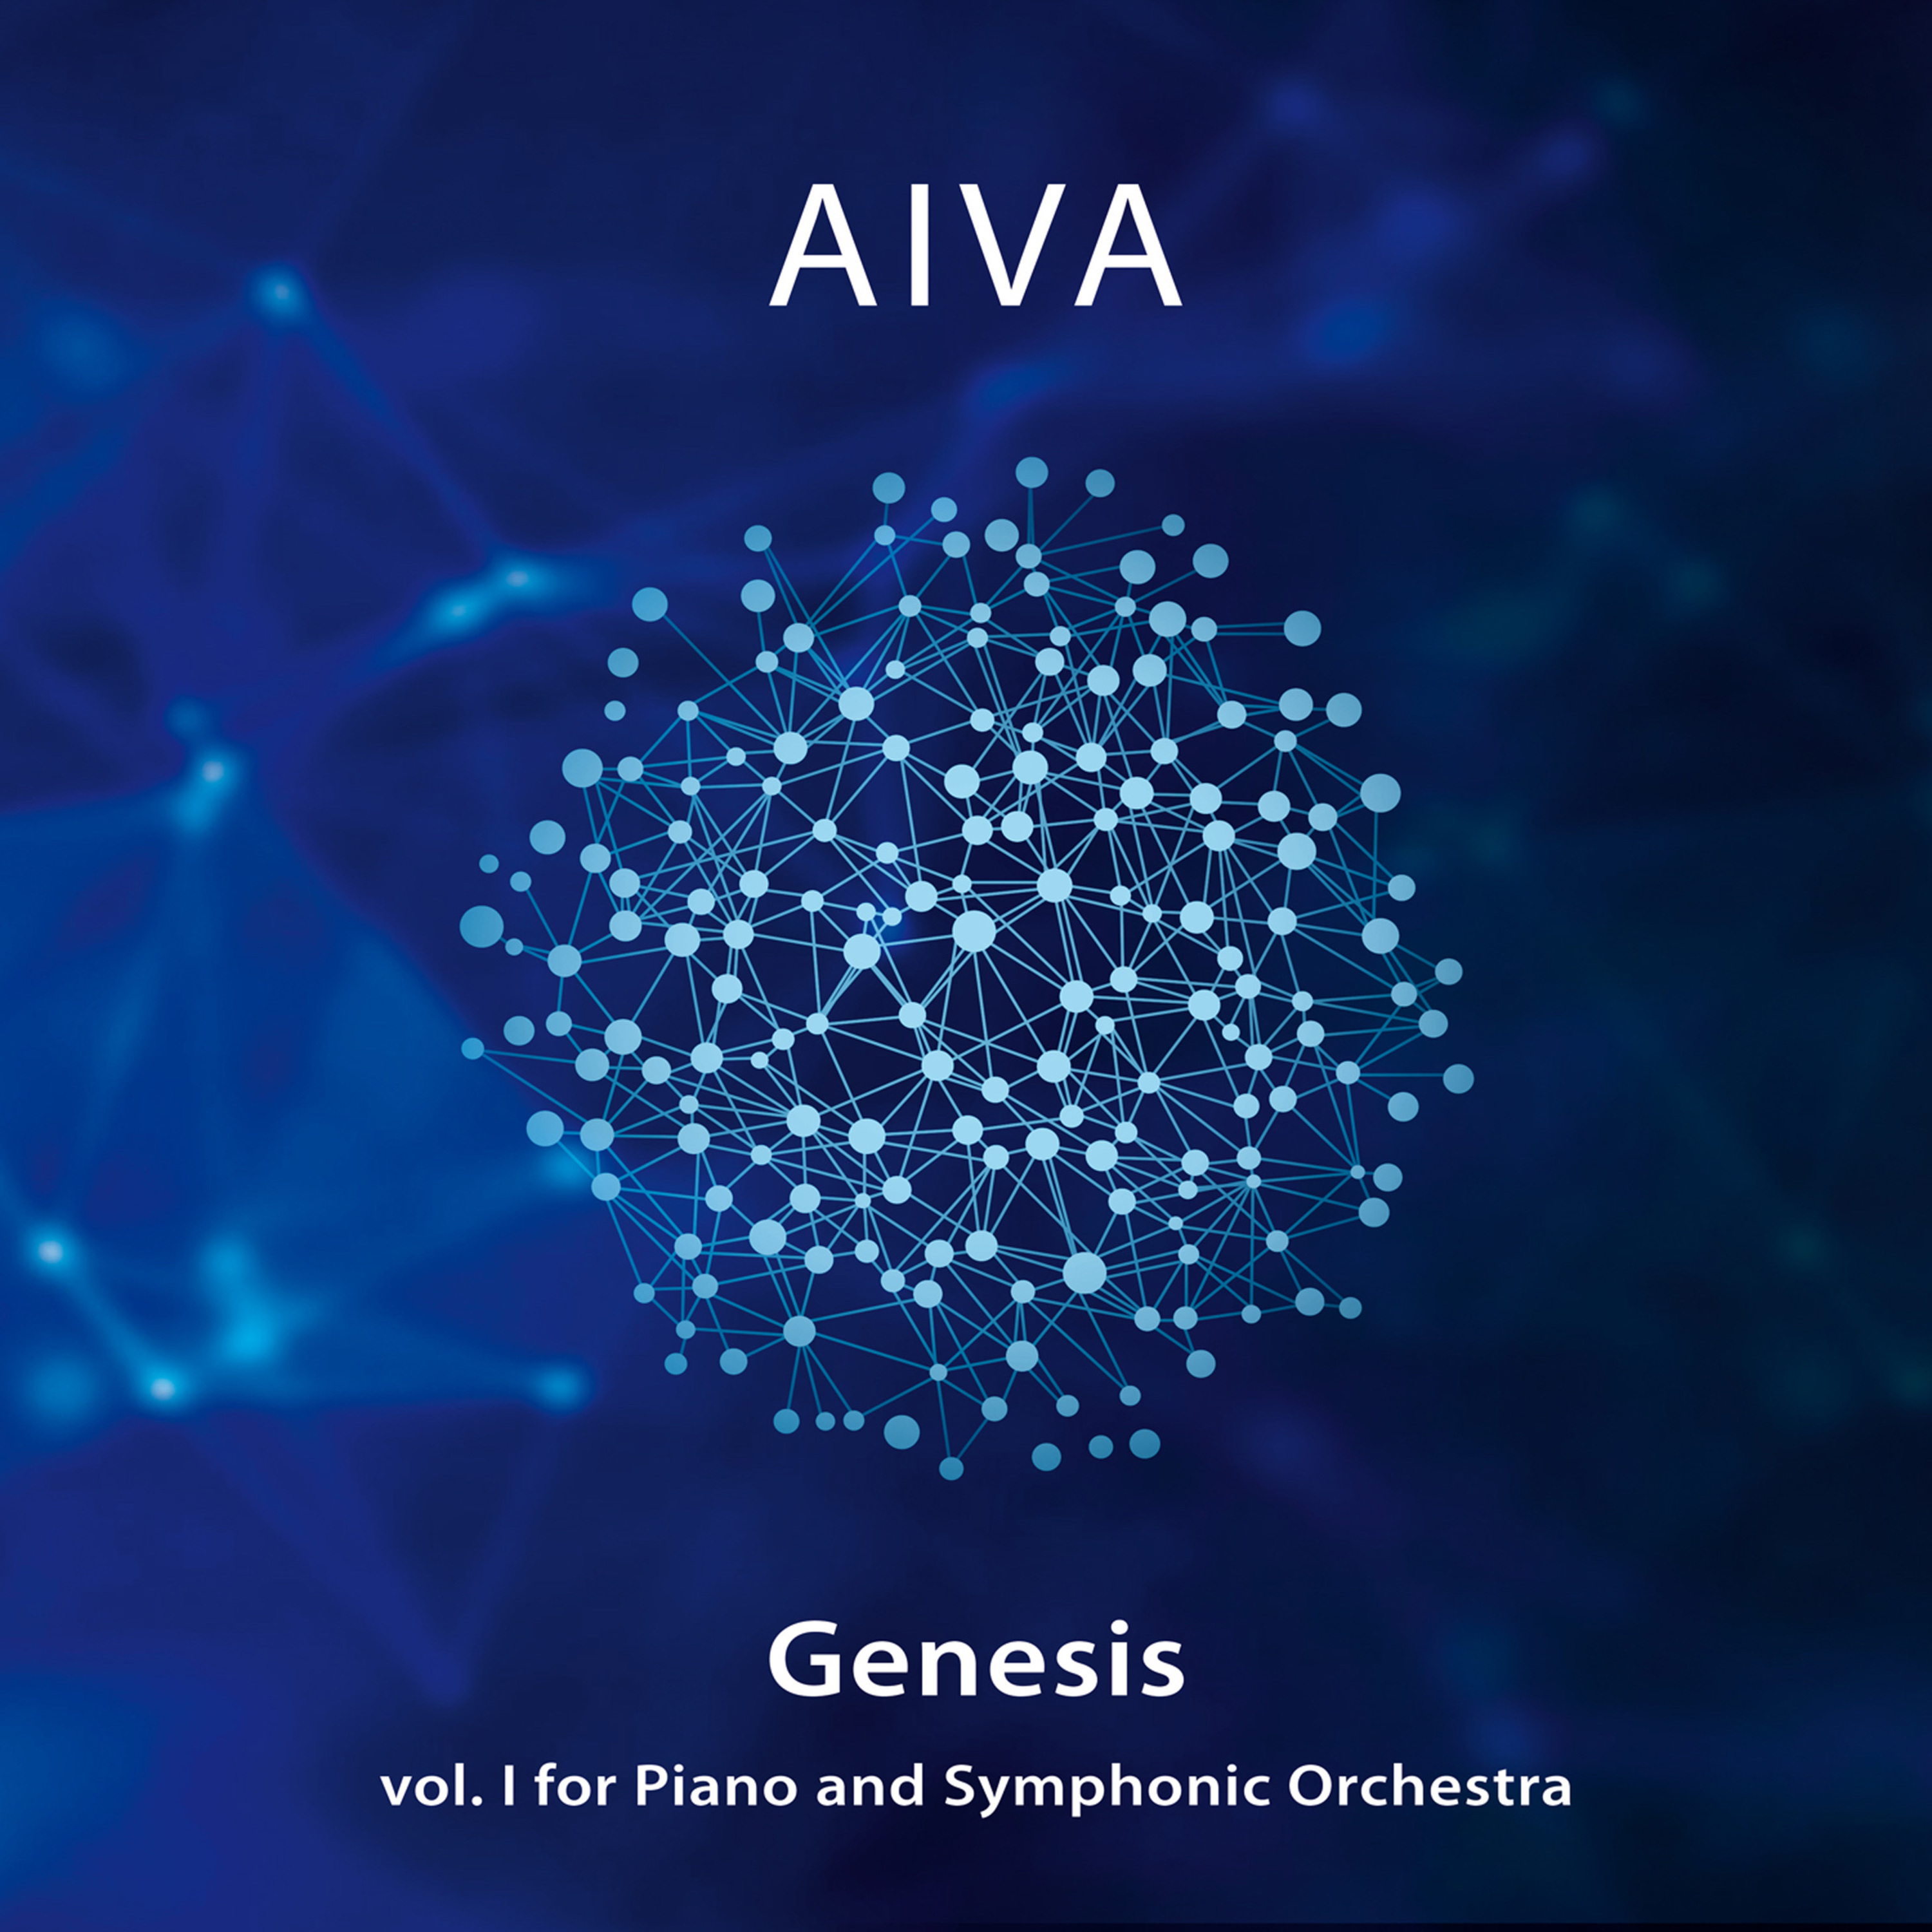 Symphonic Fantasy for Orchestra in A Minor, Op. 21: Genesis